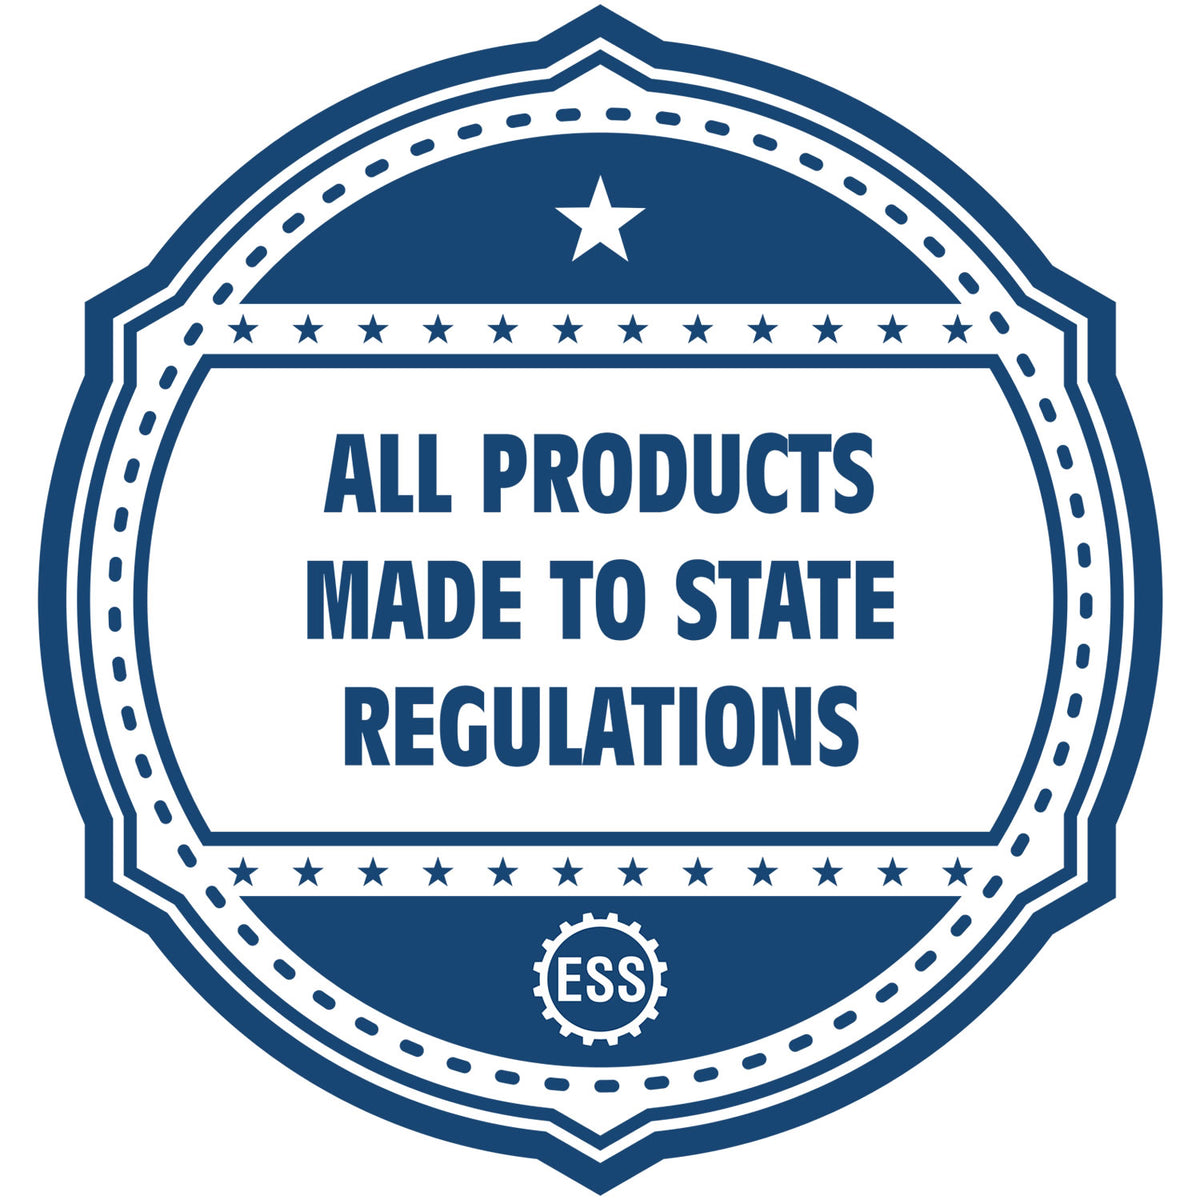 An icon or badge element for the Heavy-Duty North Carolina Rectangular Notary Stamp showing that this product is made in compliance with state regulations.